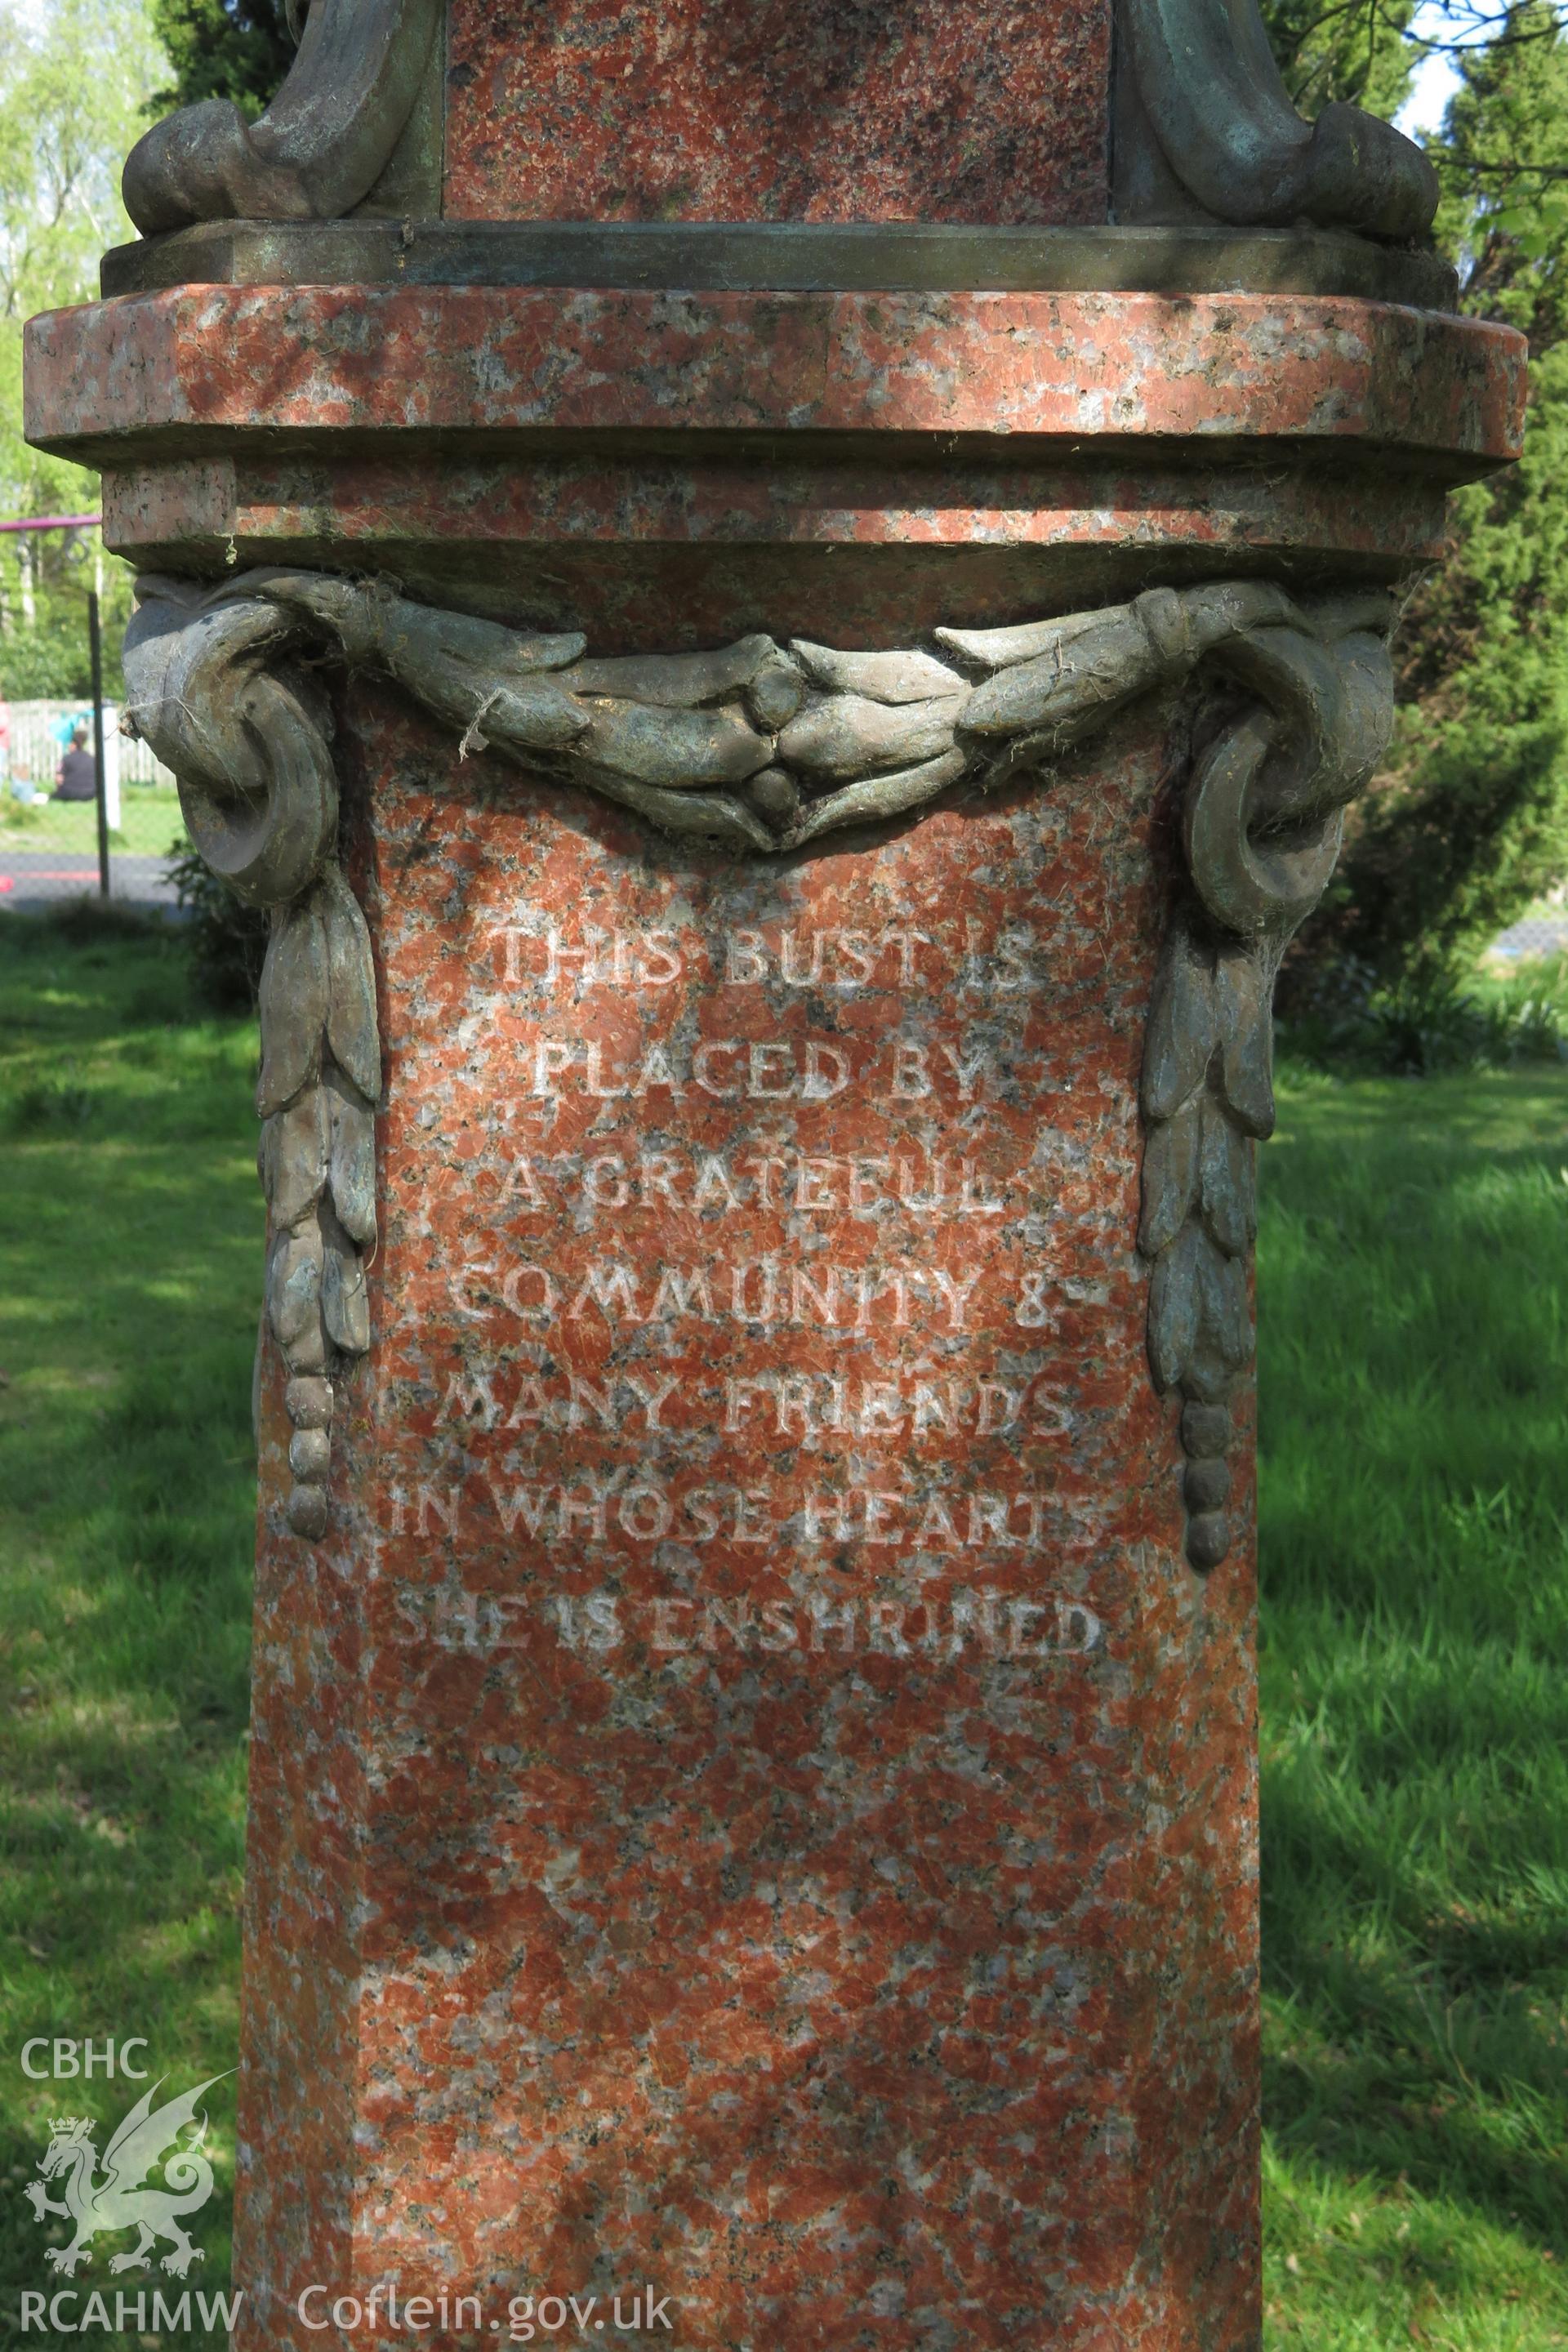 View of the inscription on the west face of the pedestal supporting the Bust of Mary Cornelia Vane-Tempest., April 2022.